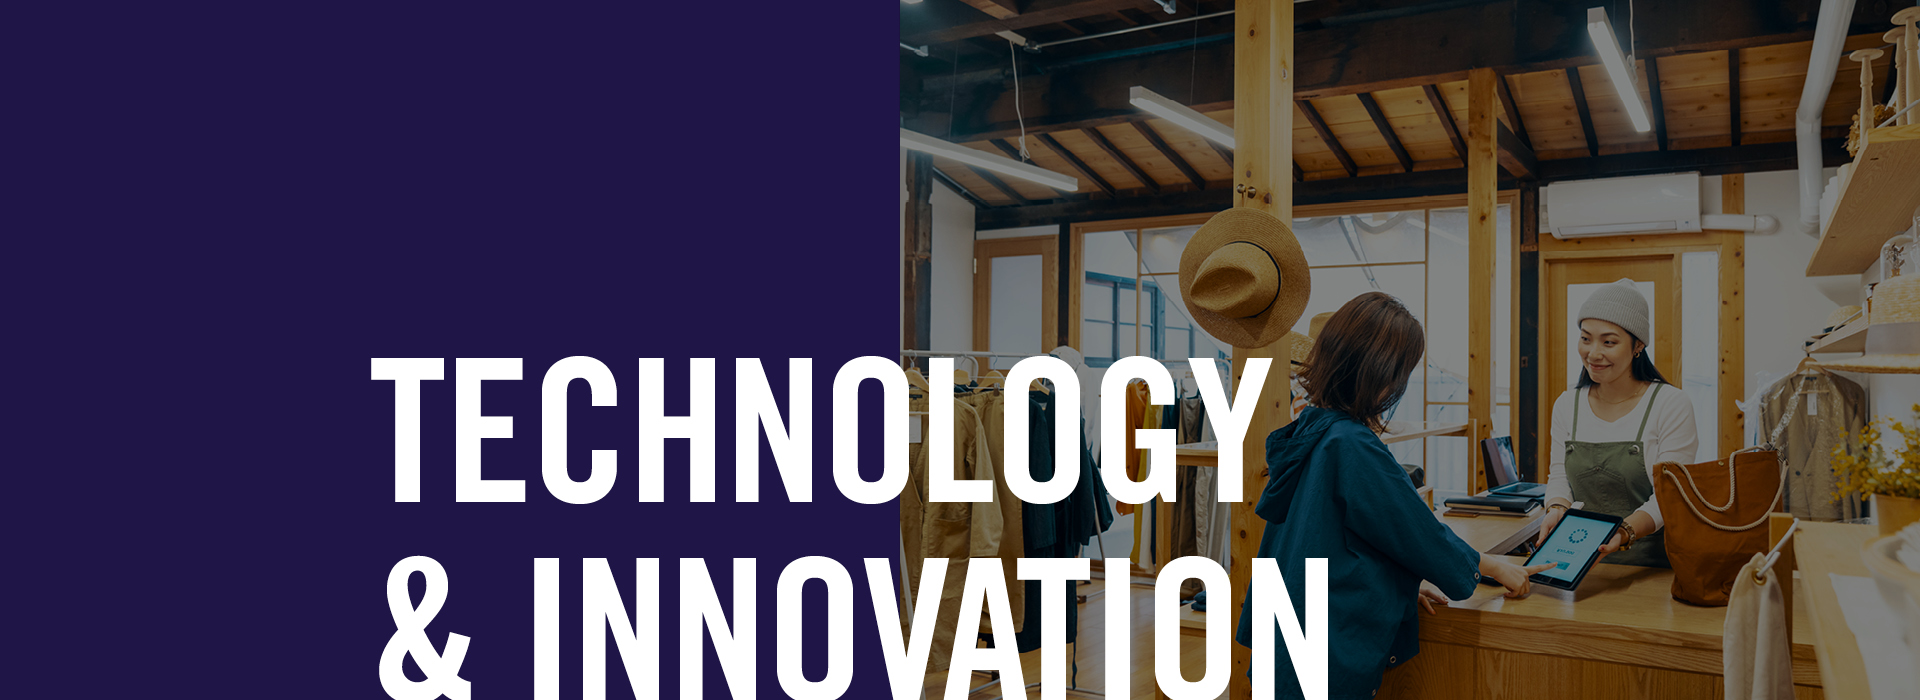 Technology and Innovation